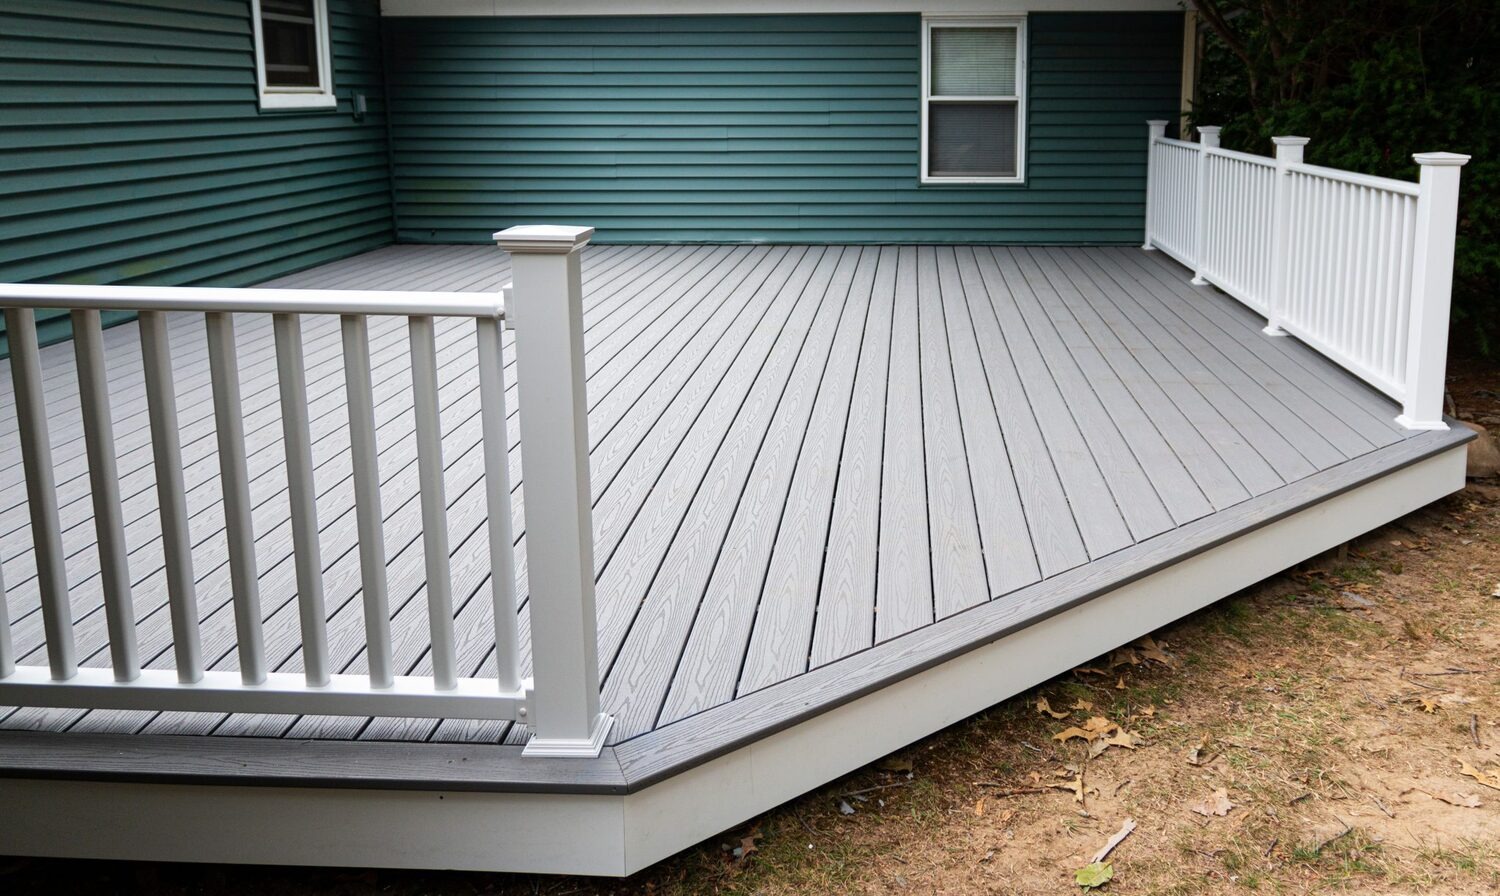 Thanks to the porch builders Glenview based, the backyard features a gorgeous wooden deck